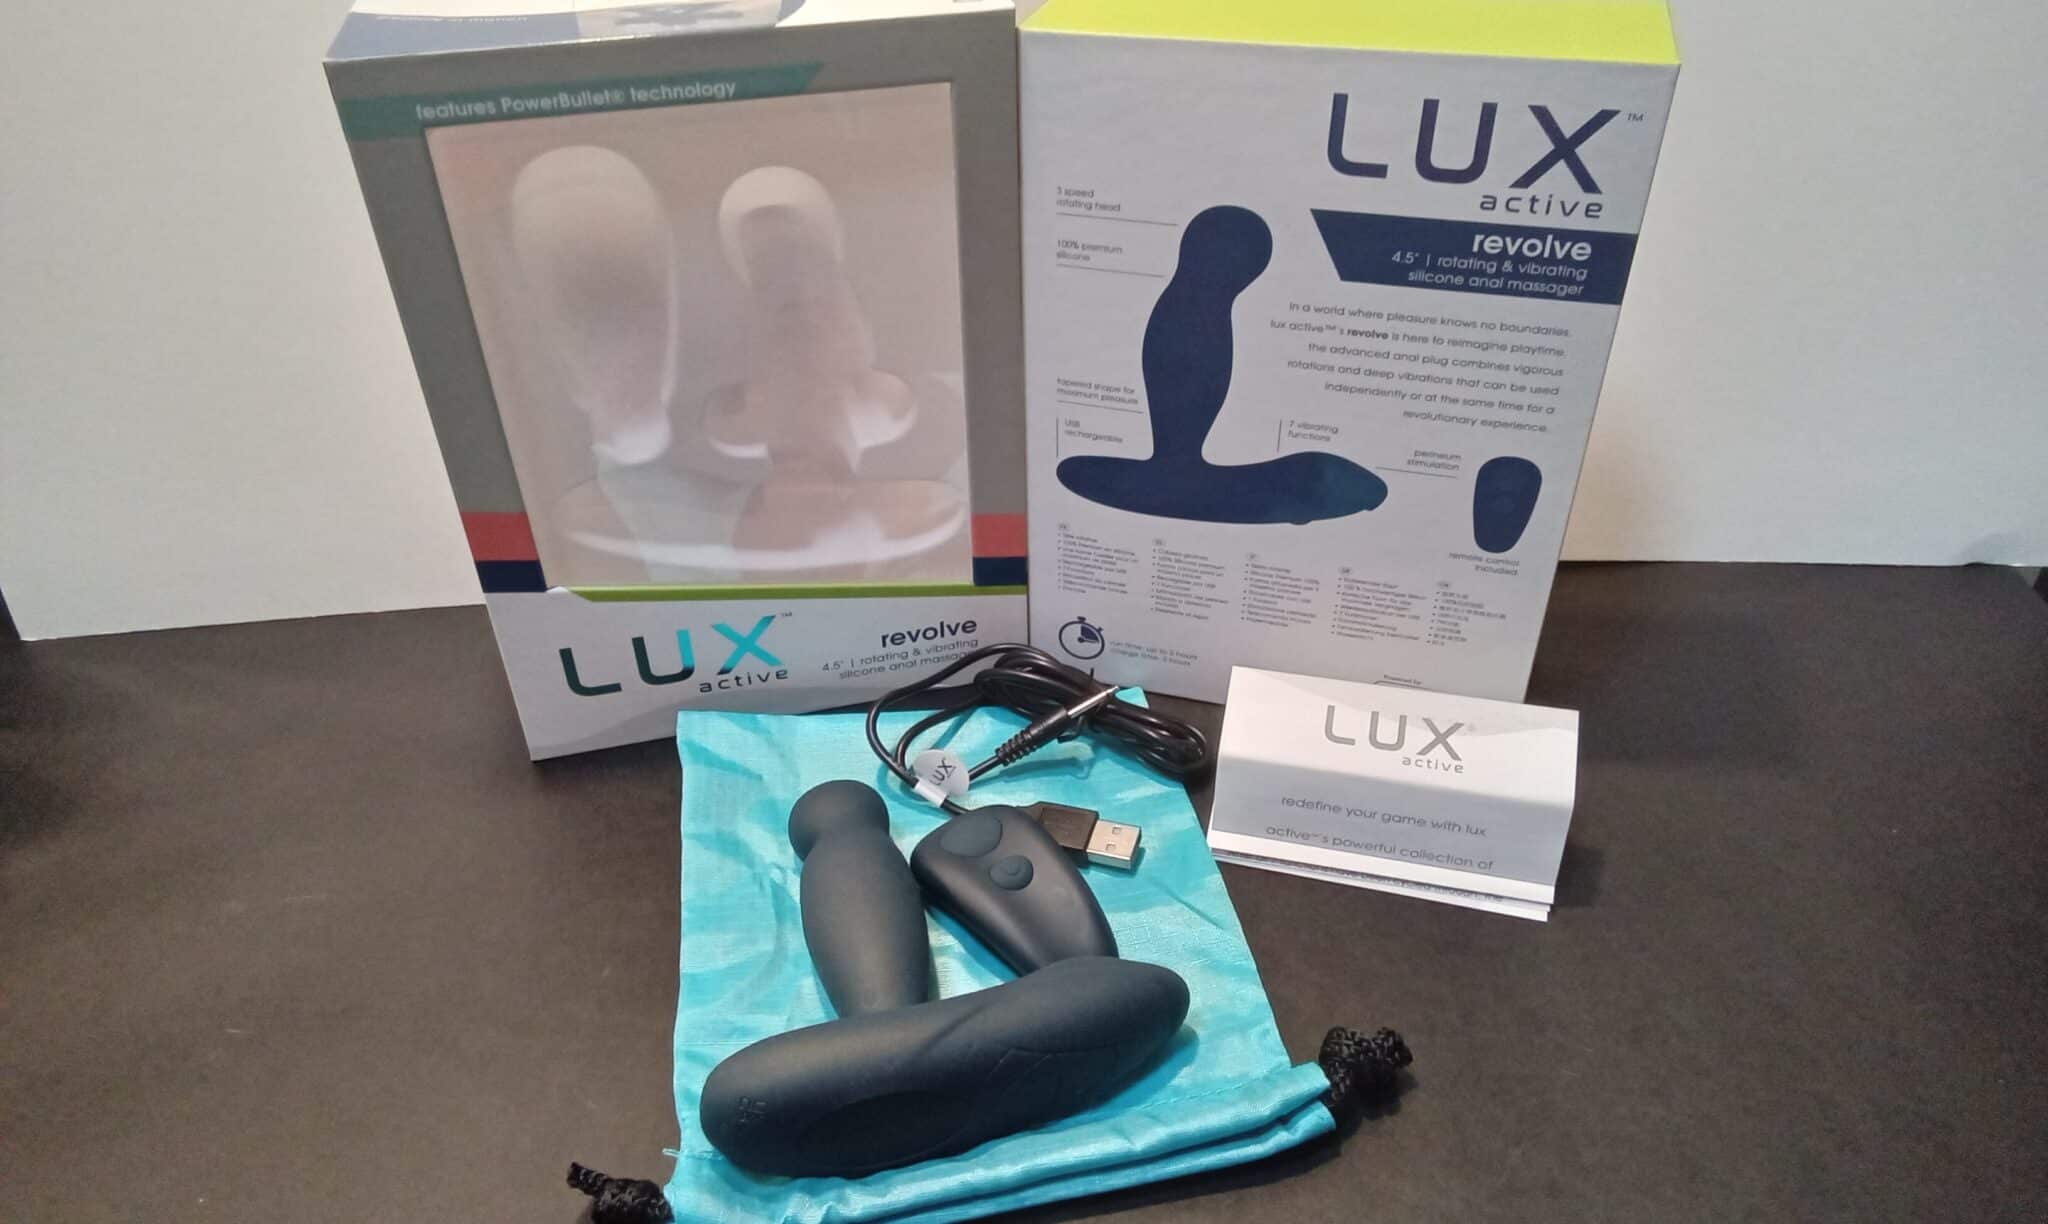 Lux Active Revolve Rotating Prostate Massager  Evaluating the Peepshow Toys - LUX ACTIVE REVOLVE’s packaging